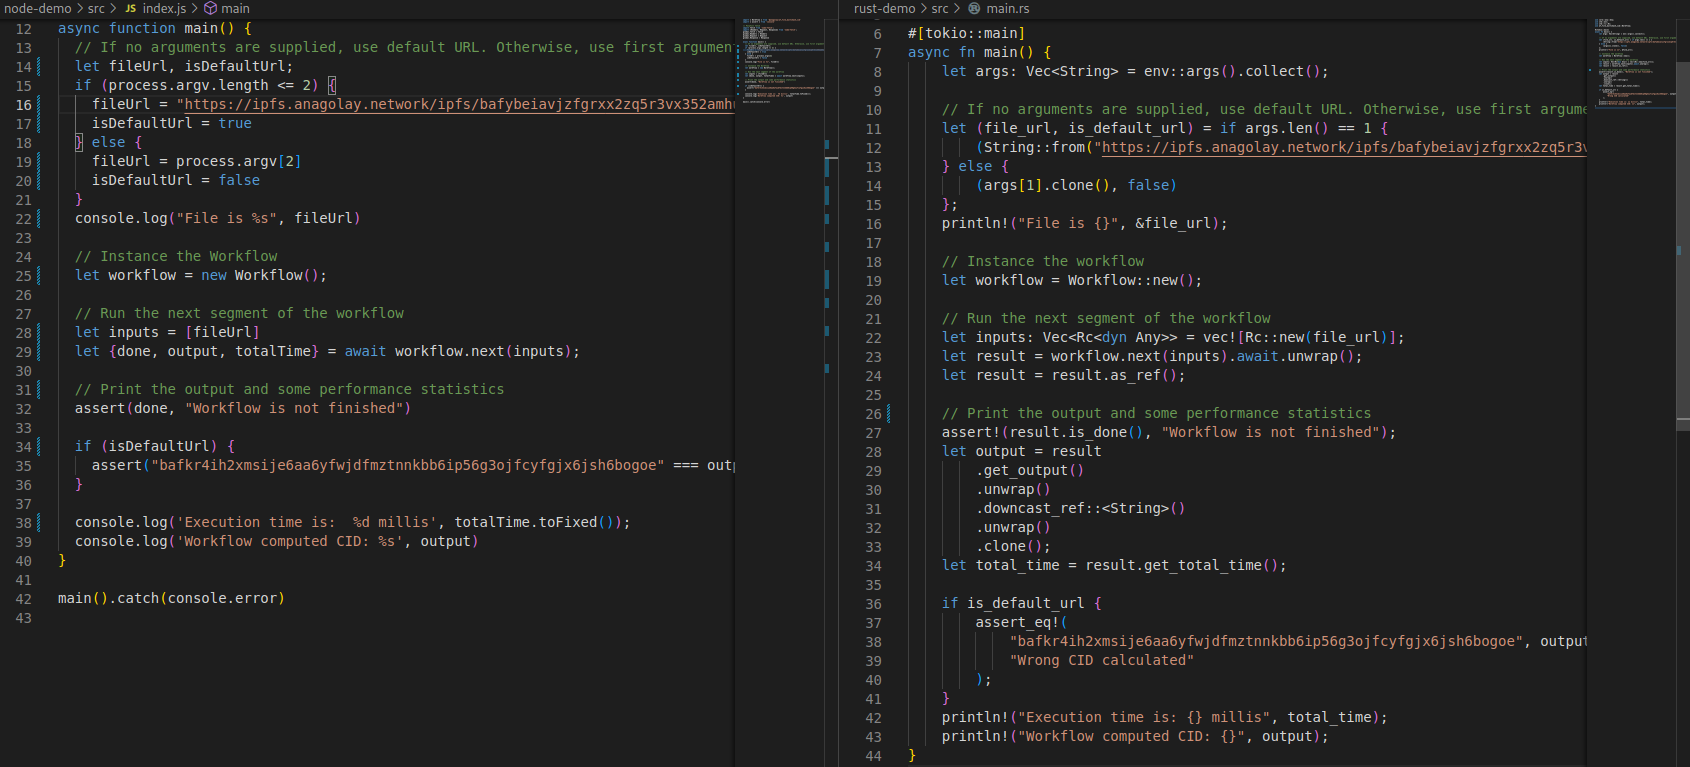 Code to execute the Workflow can be written in JavaScript (left) and in Rust (right). These examples are taken from the Deliverable Support repo